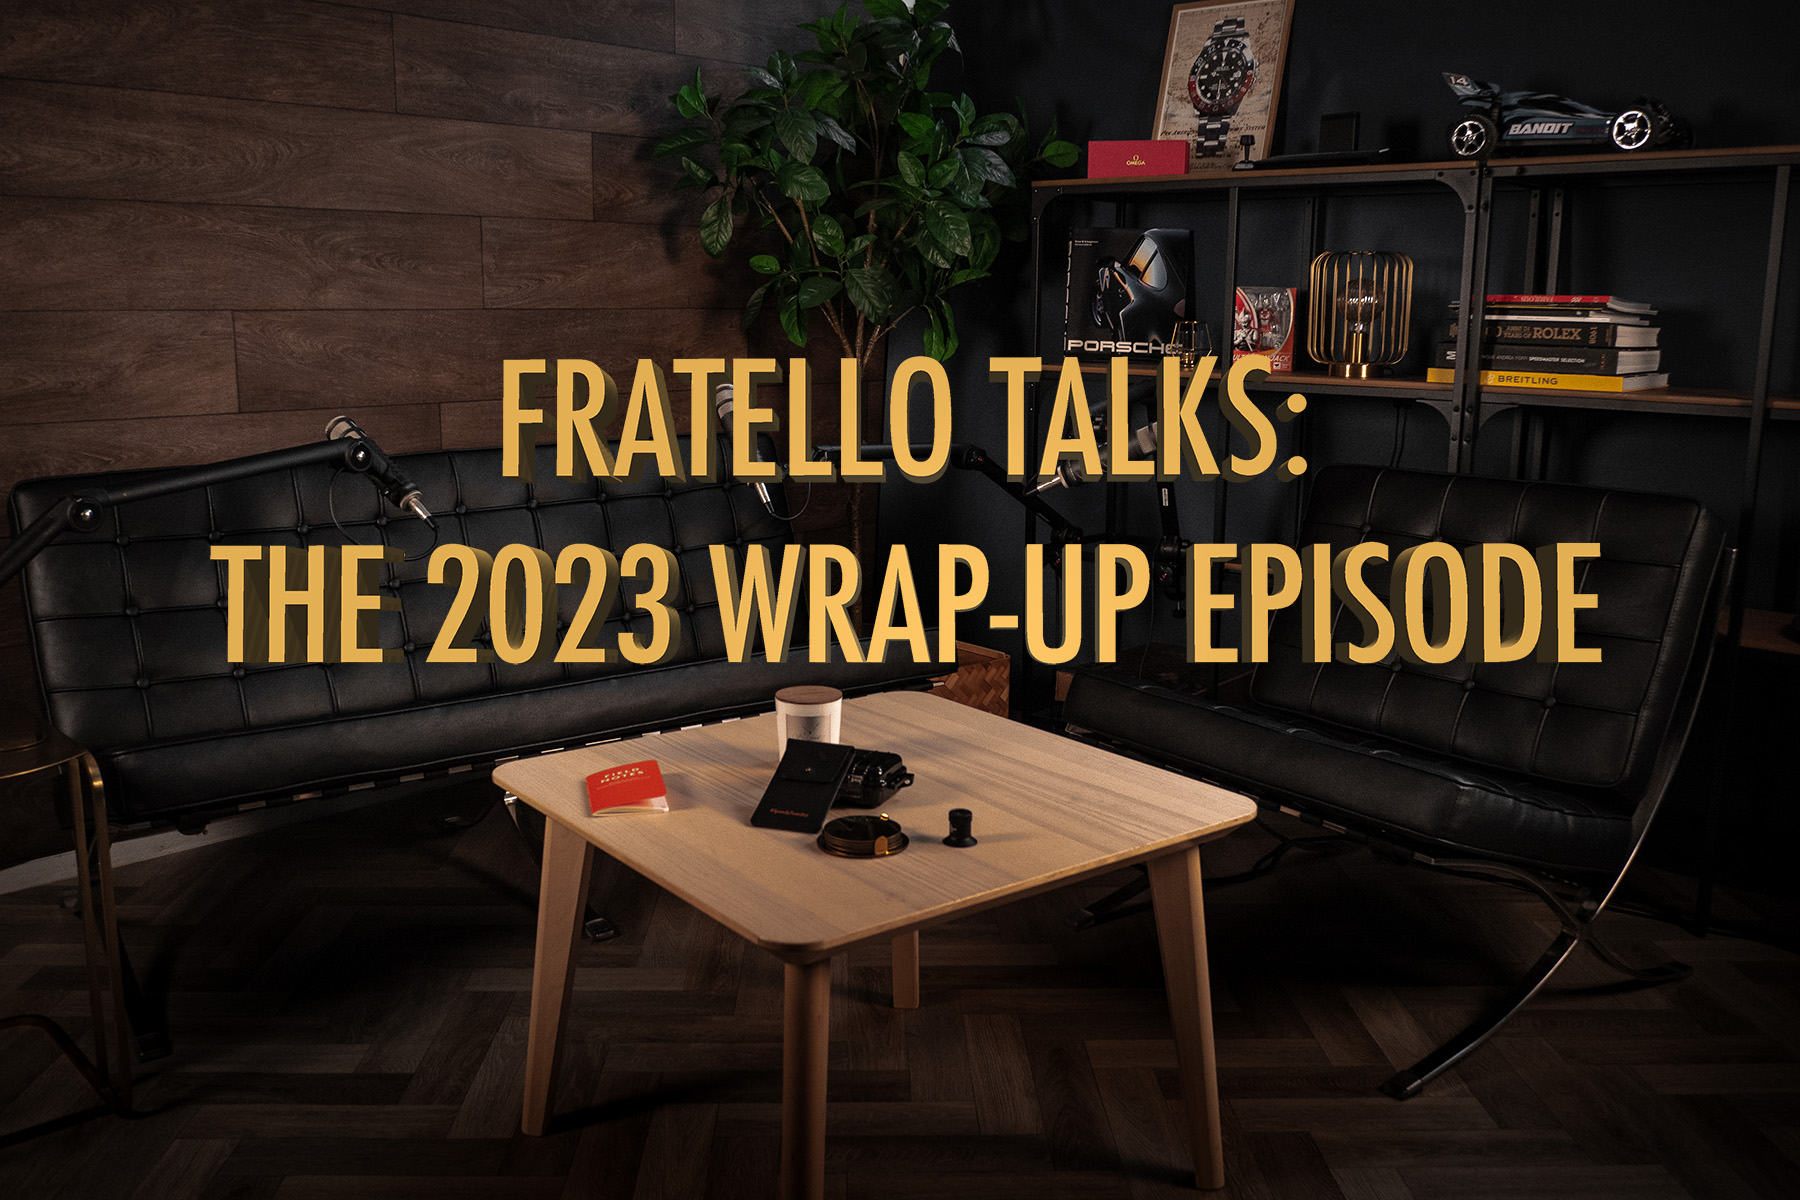 Fratello Talks: The 2023 Wrap-Up Episode